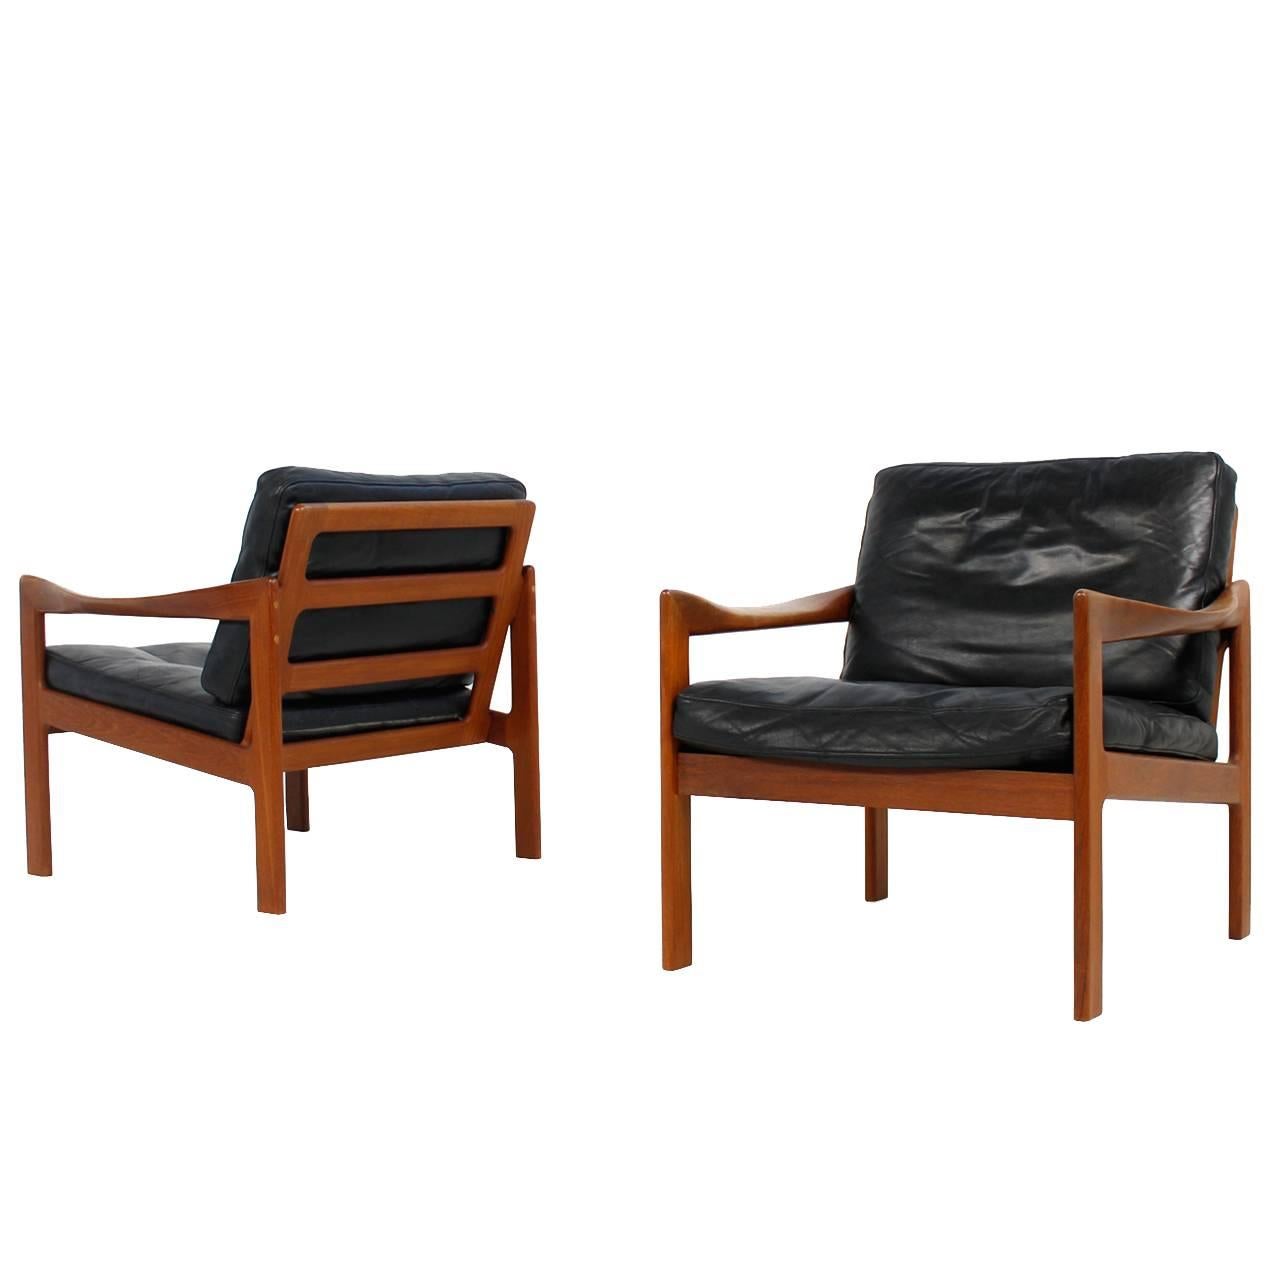 Pair of Two 1960s Danish Modern Teak and Leather Easy Chairs by Illum Wikkelso